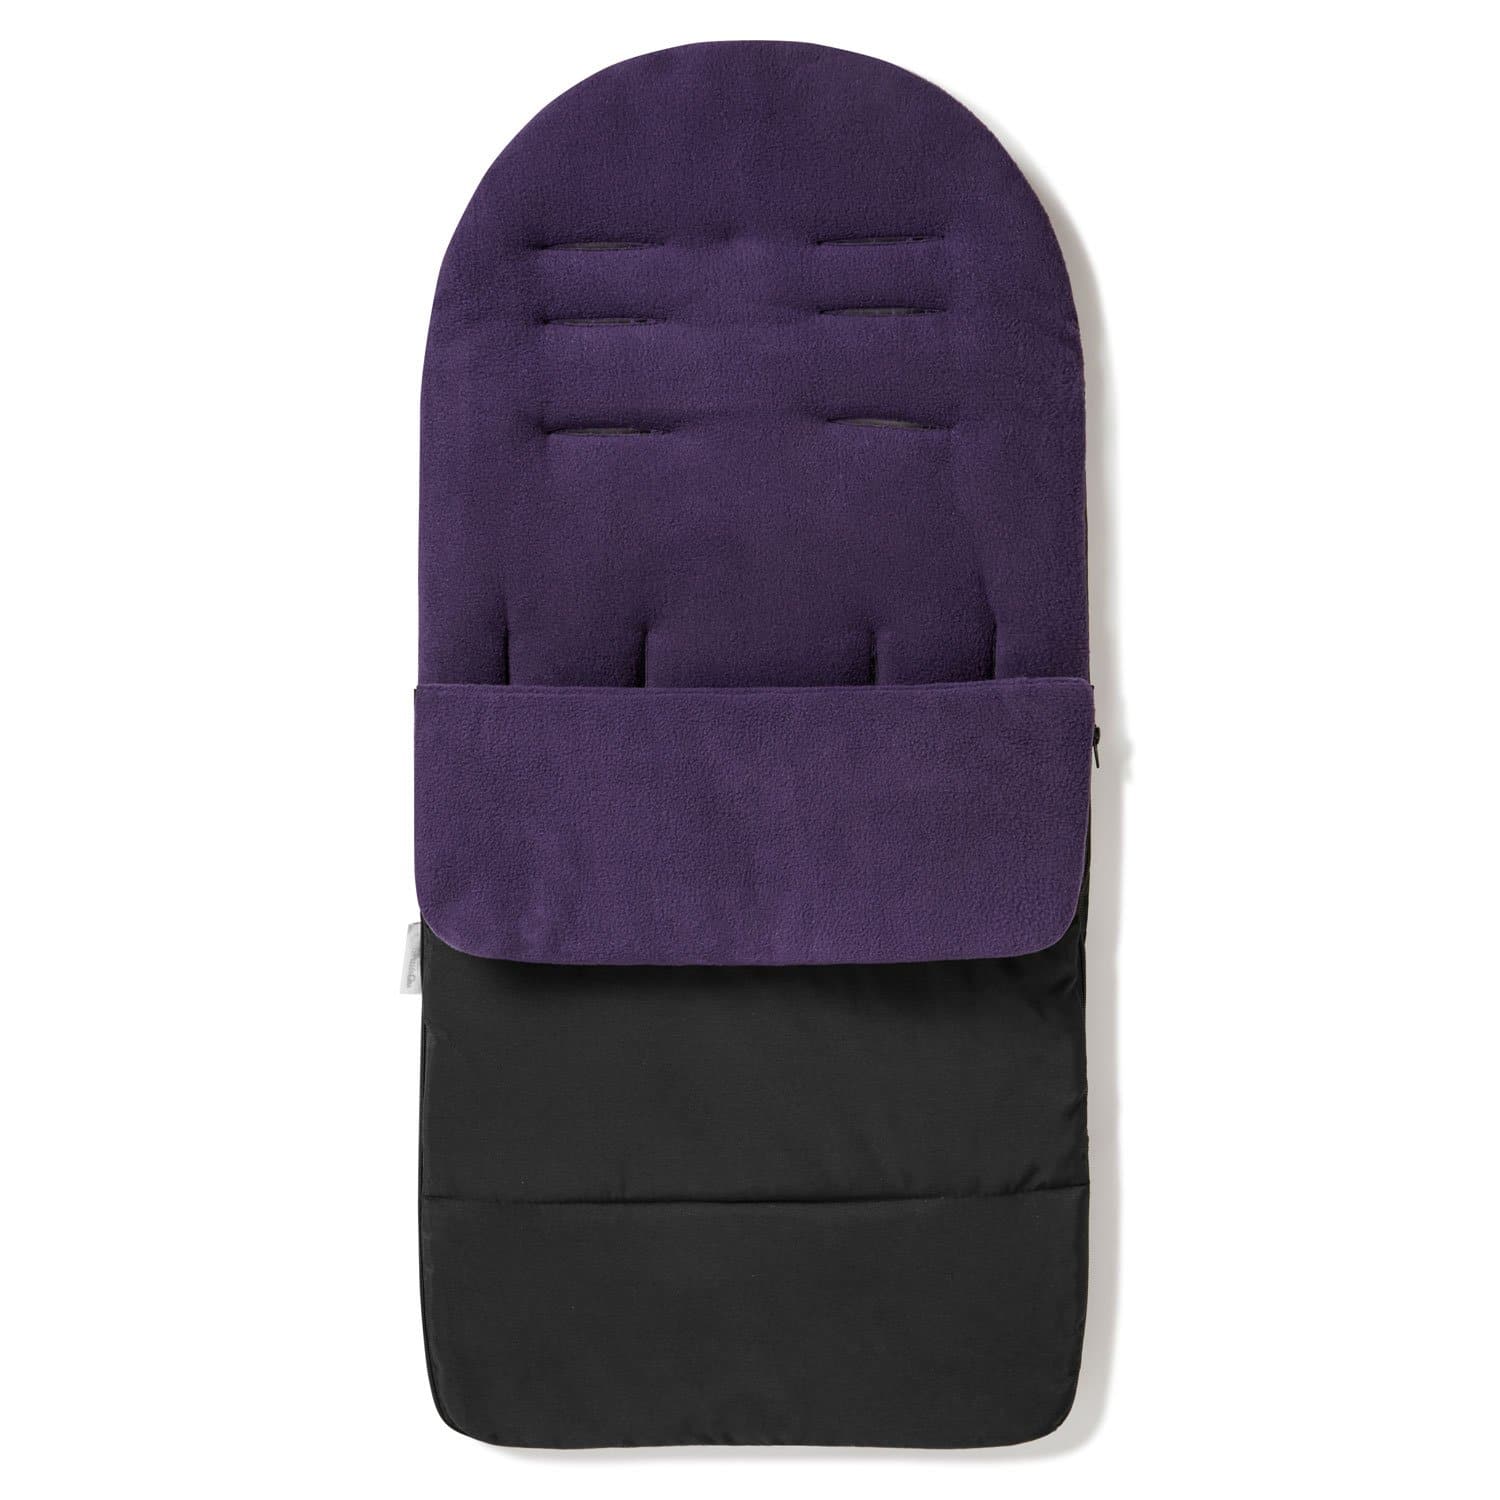 Premium Footmuff / Cosy Toes Compatible with BOB - Plum Purple / Fits All Models | For Your Little One